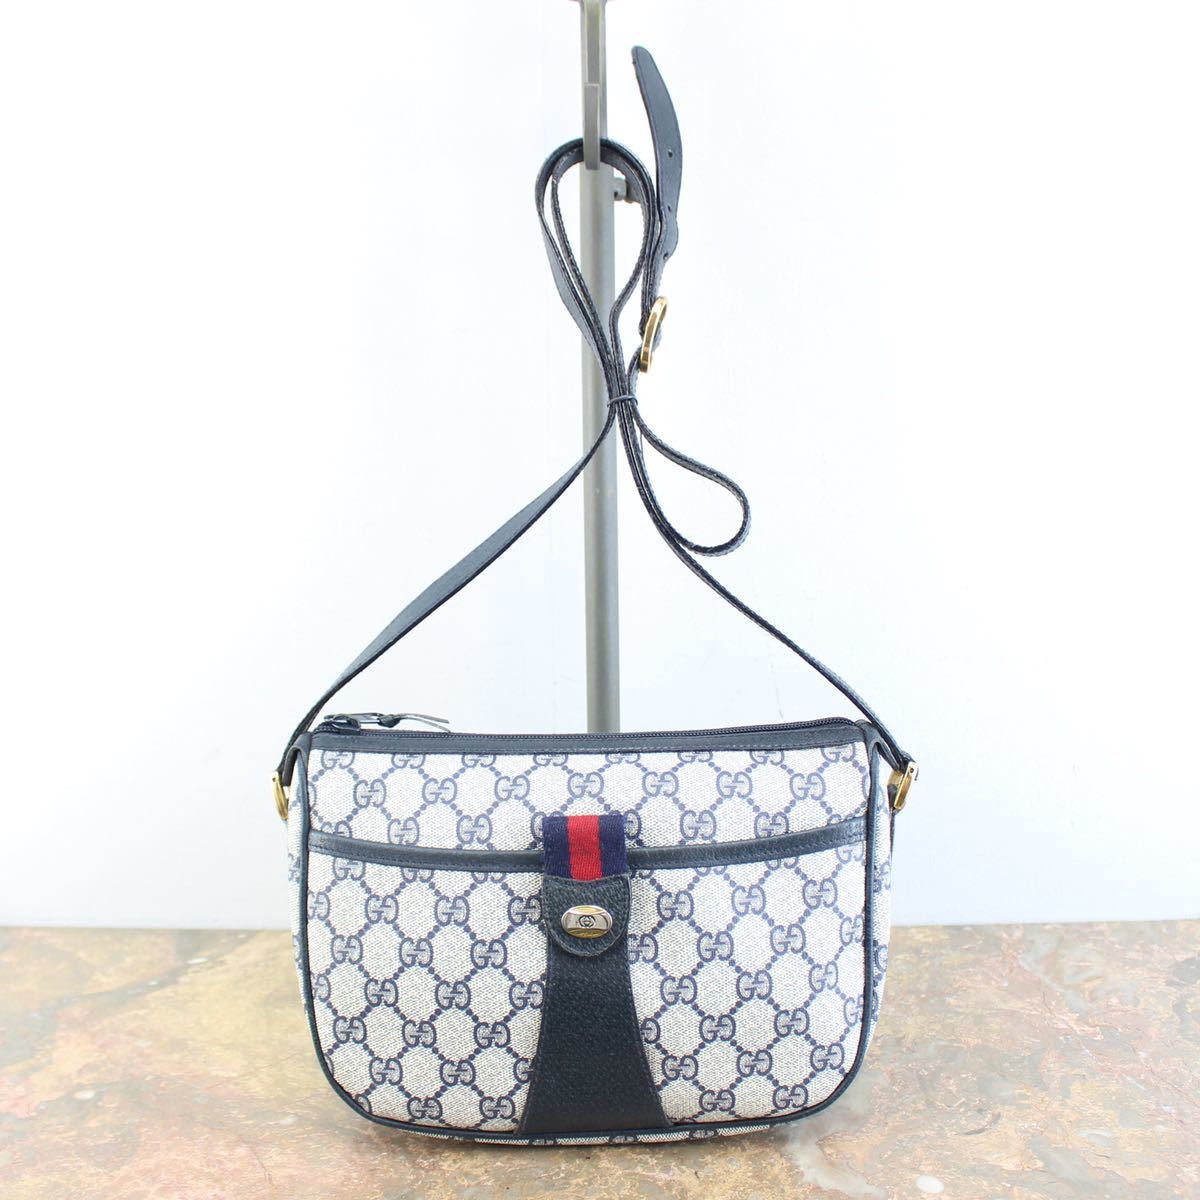 OLD GUCCI GG PATTERNED SHERRY LINE SHOULDER BAG MADE IN ITALY